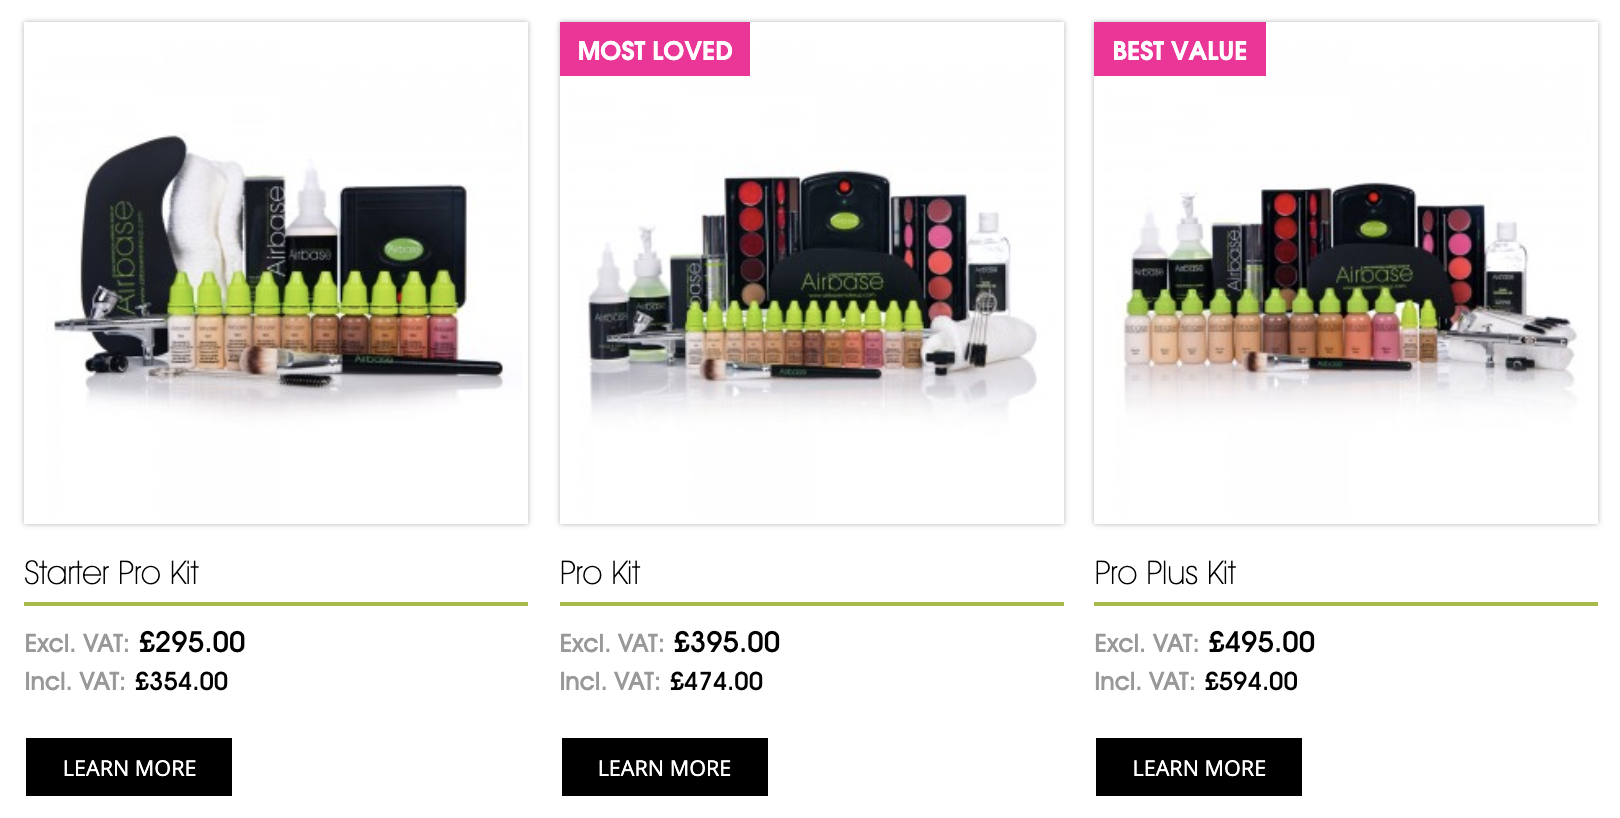 Pro airbrush makeup kits are the most hygienic way to apply makeup